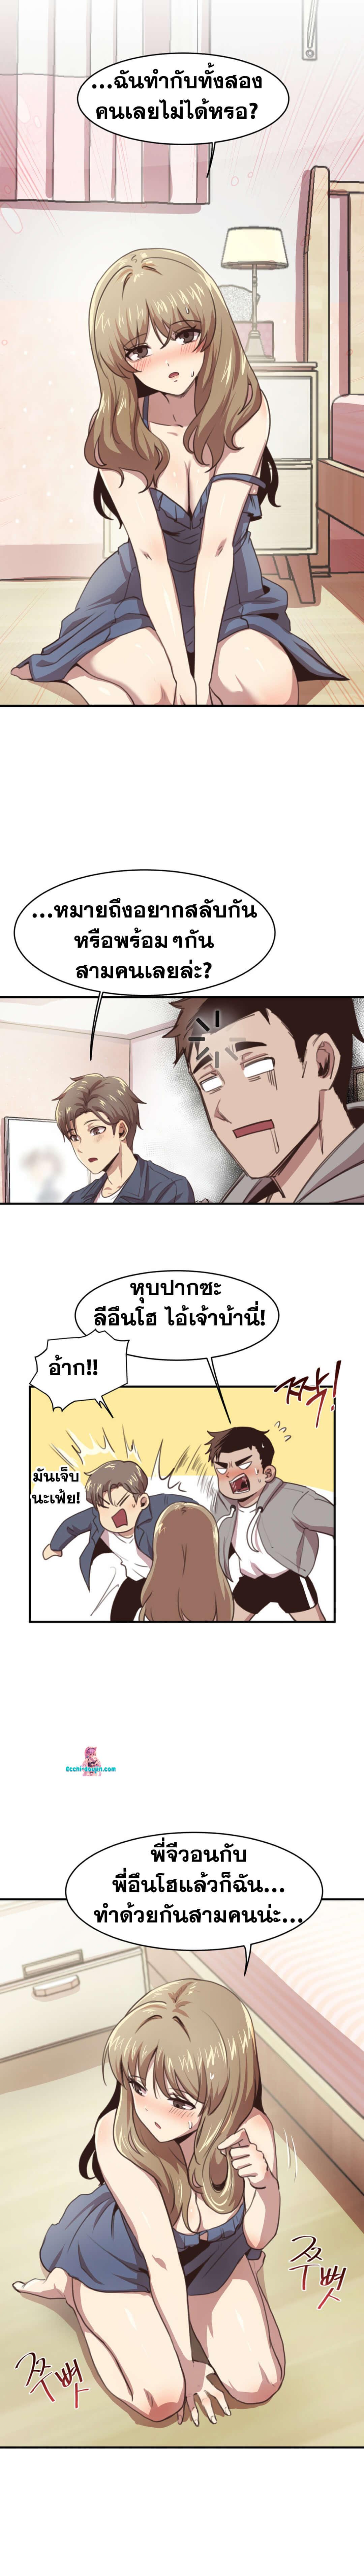 With My Brother’s Friends ตอนที่ 3 ภาพ 2